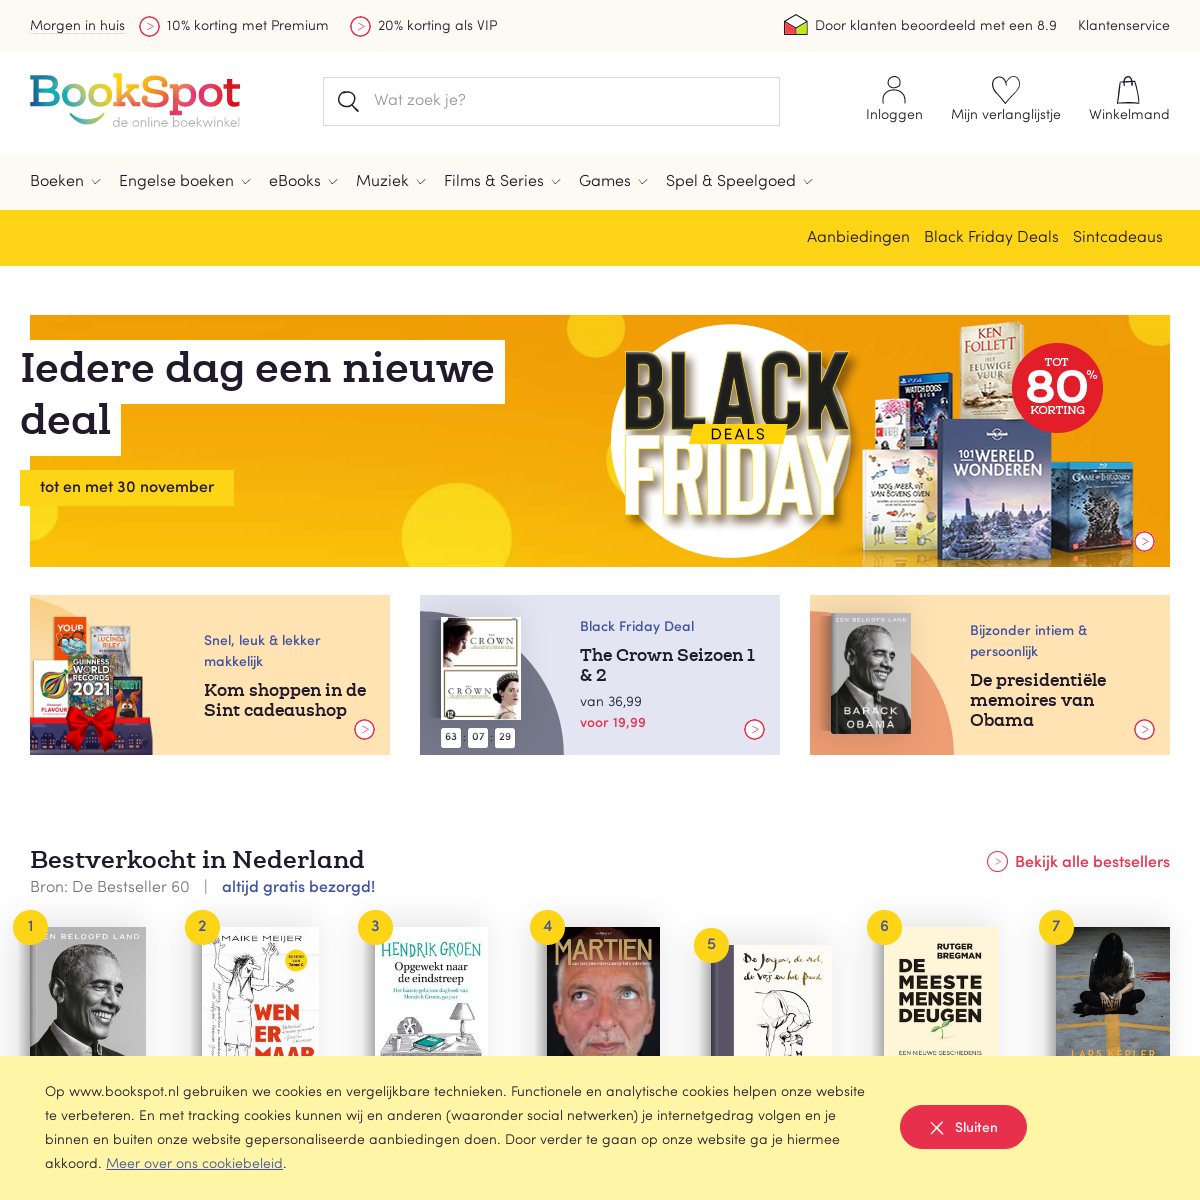 A complete backup of bookspot.nl